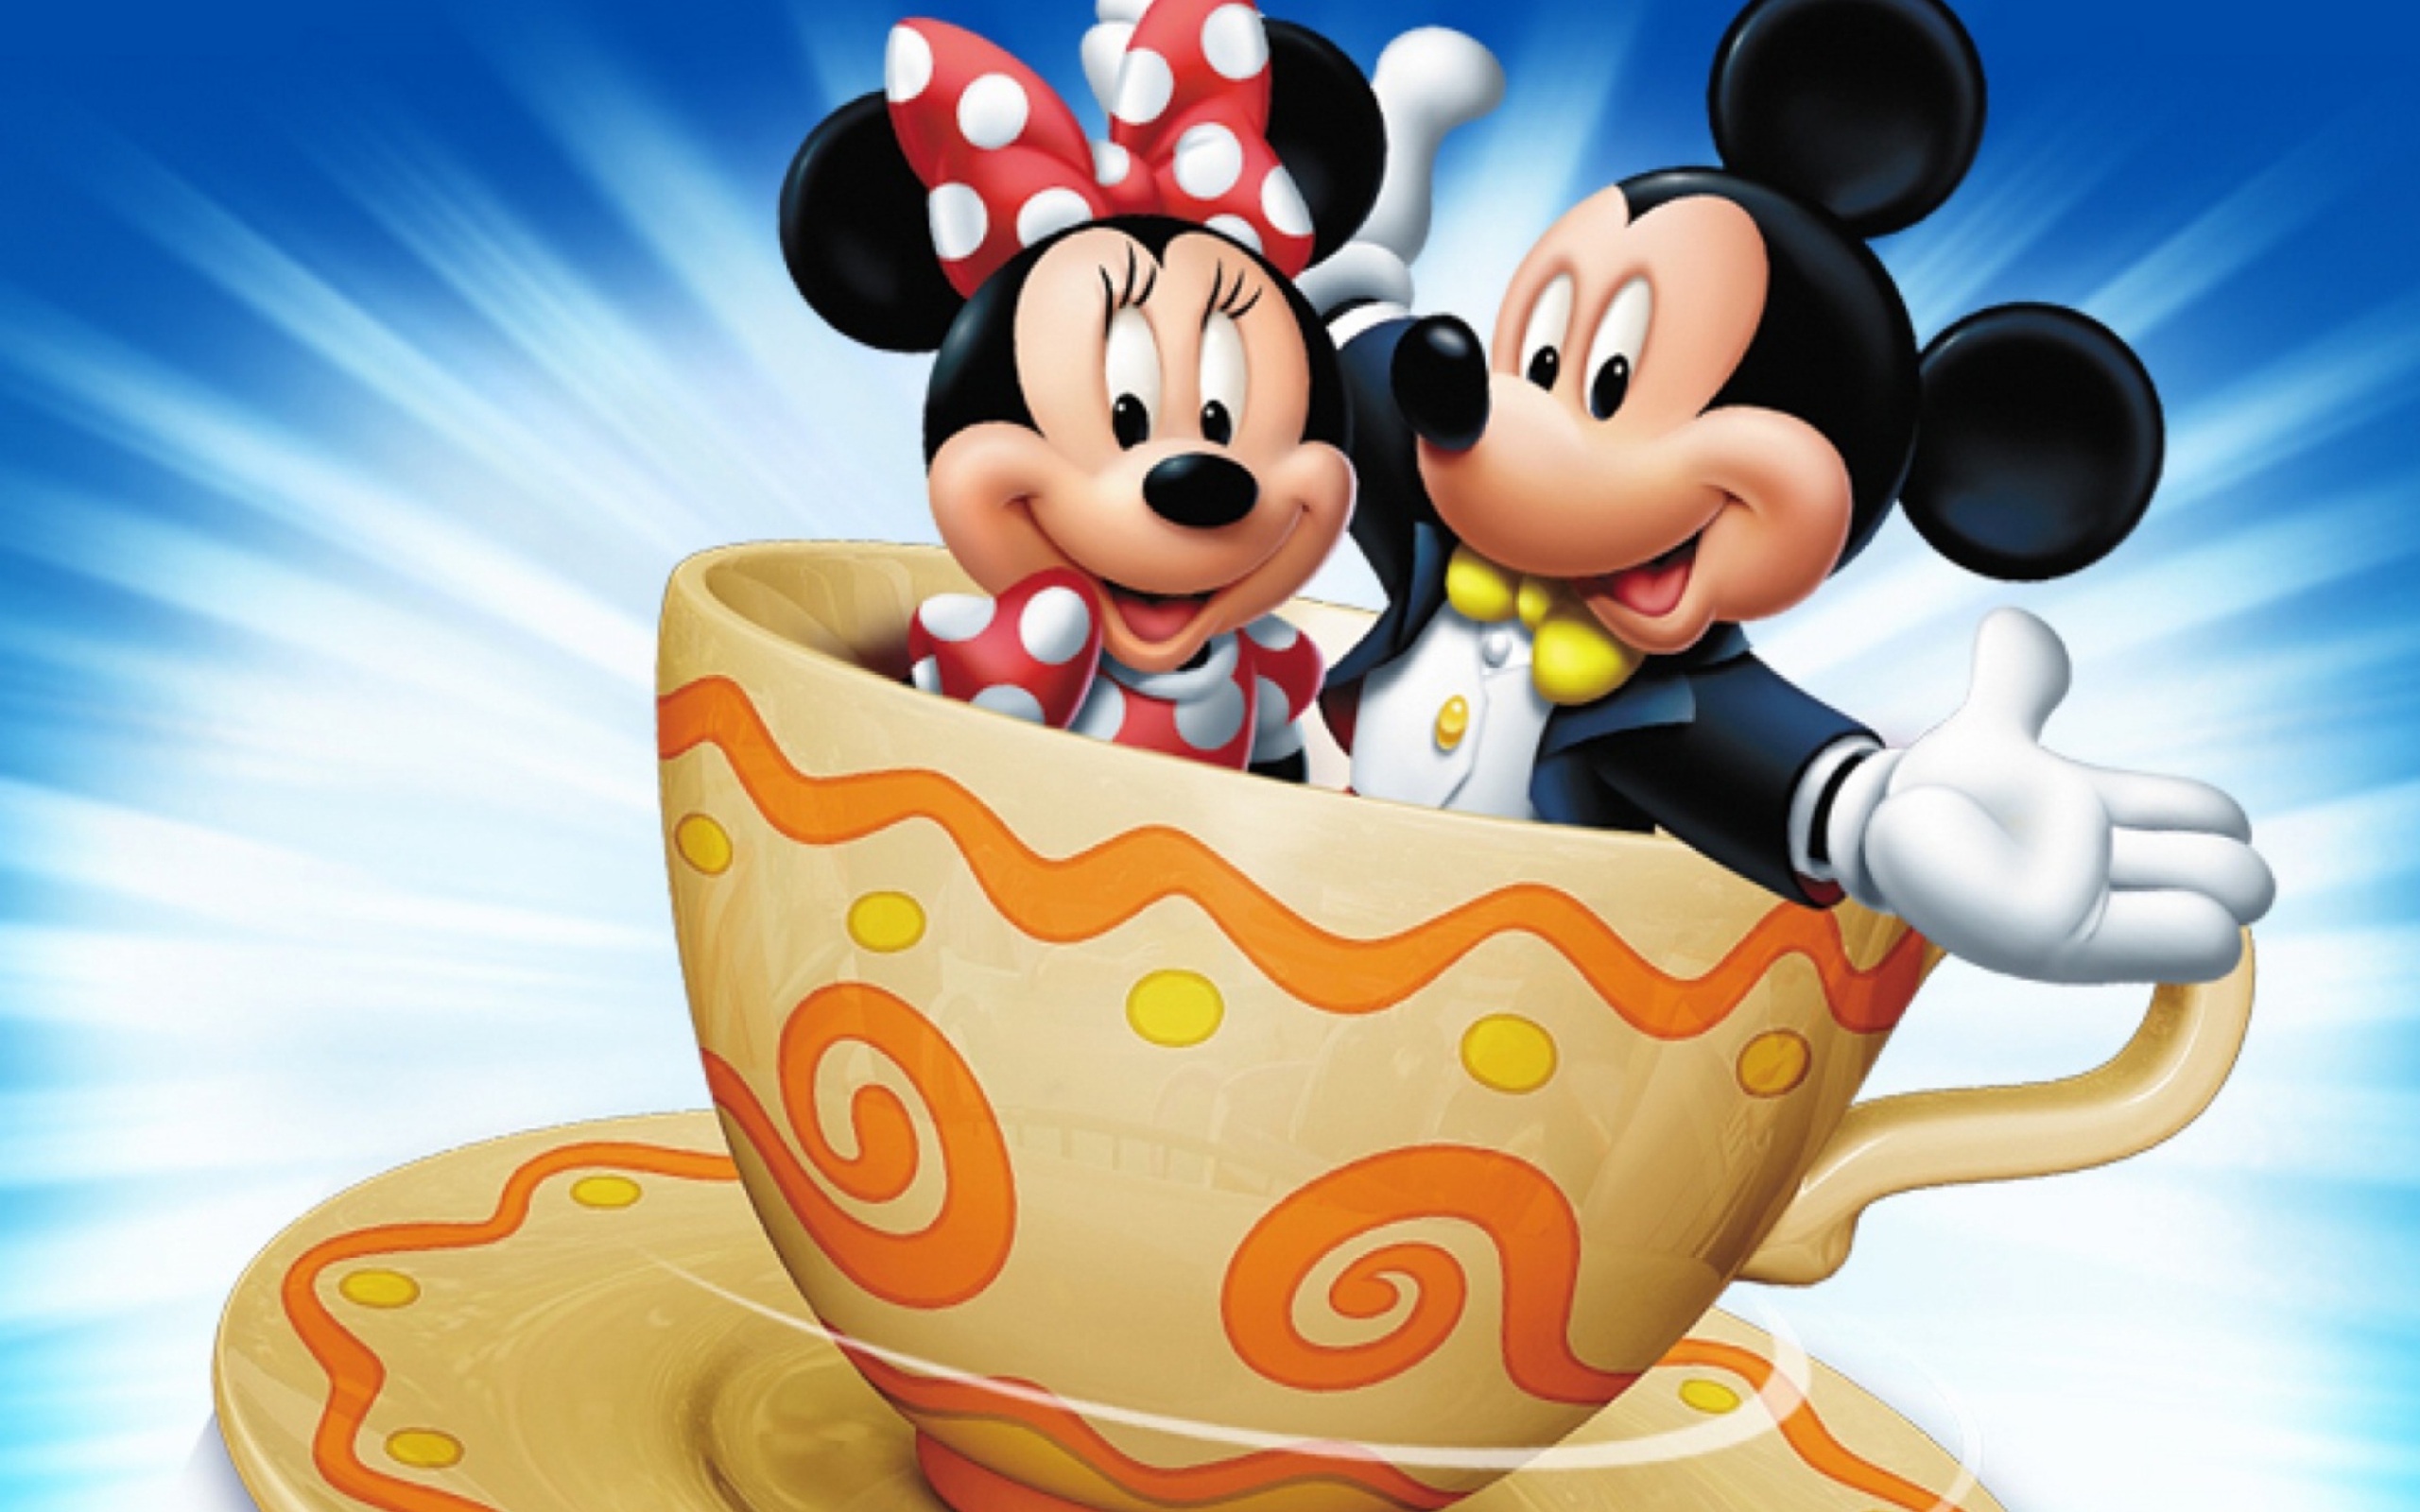 Mickey And Minnie Mouse In Cup wallpaper 2560x1600